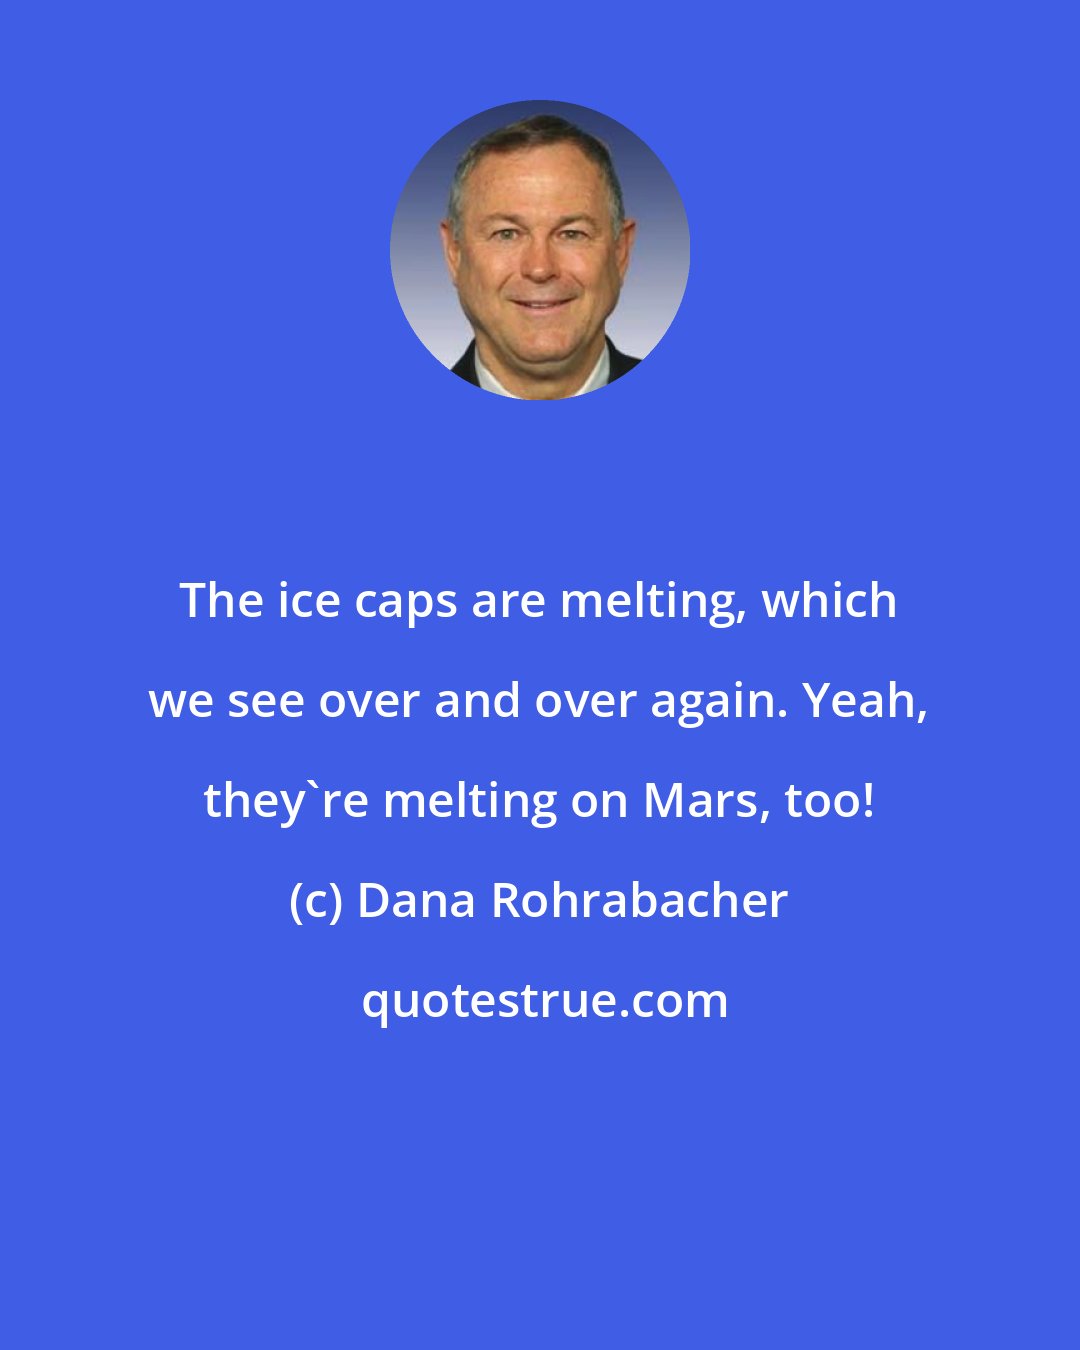 Dana Rohrabacher: The ice caps are melting, which we see over and over again. Yeah, they're melting on Mars, too!